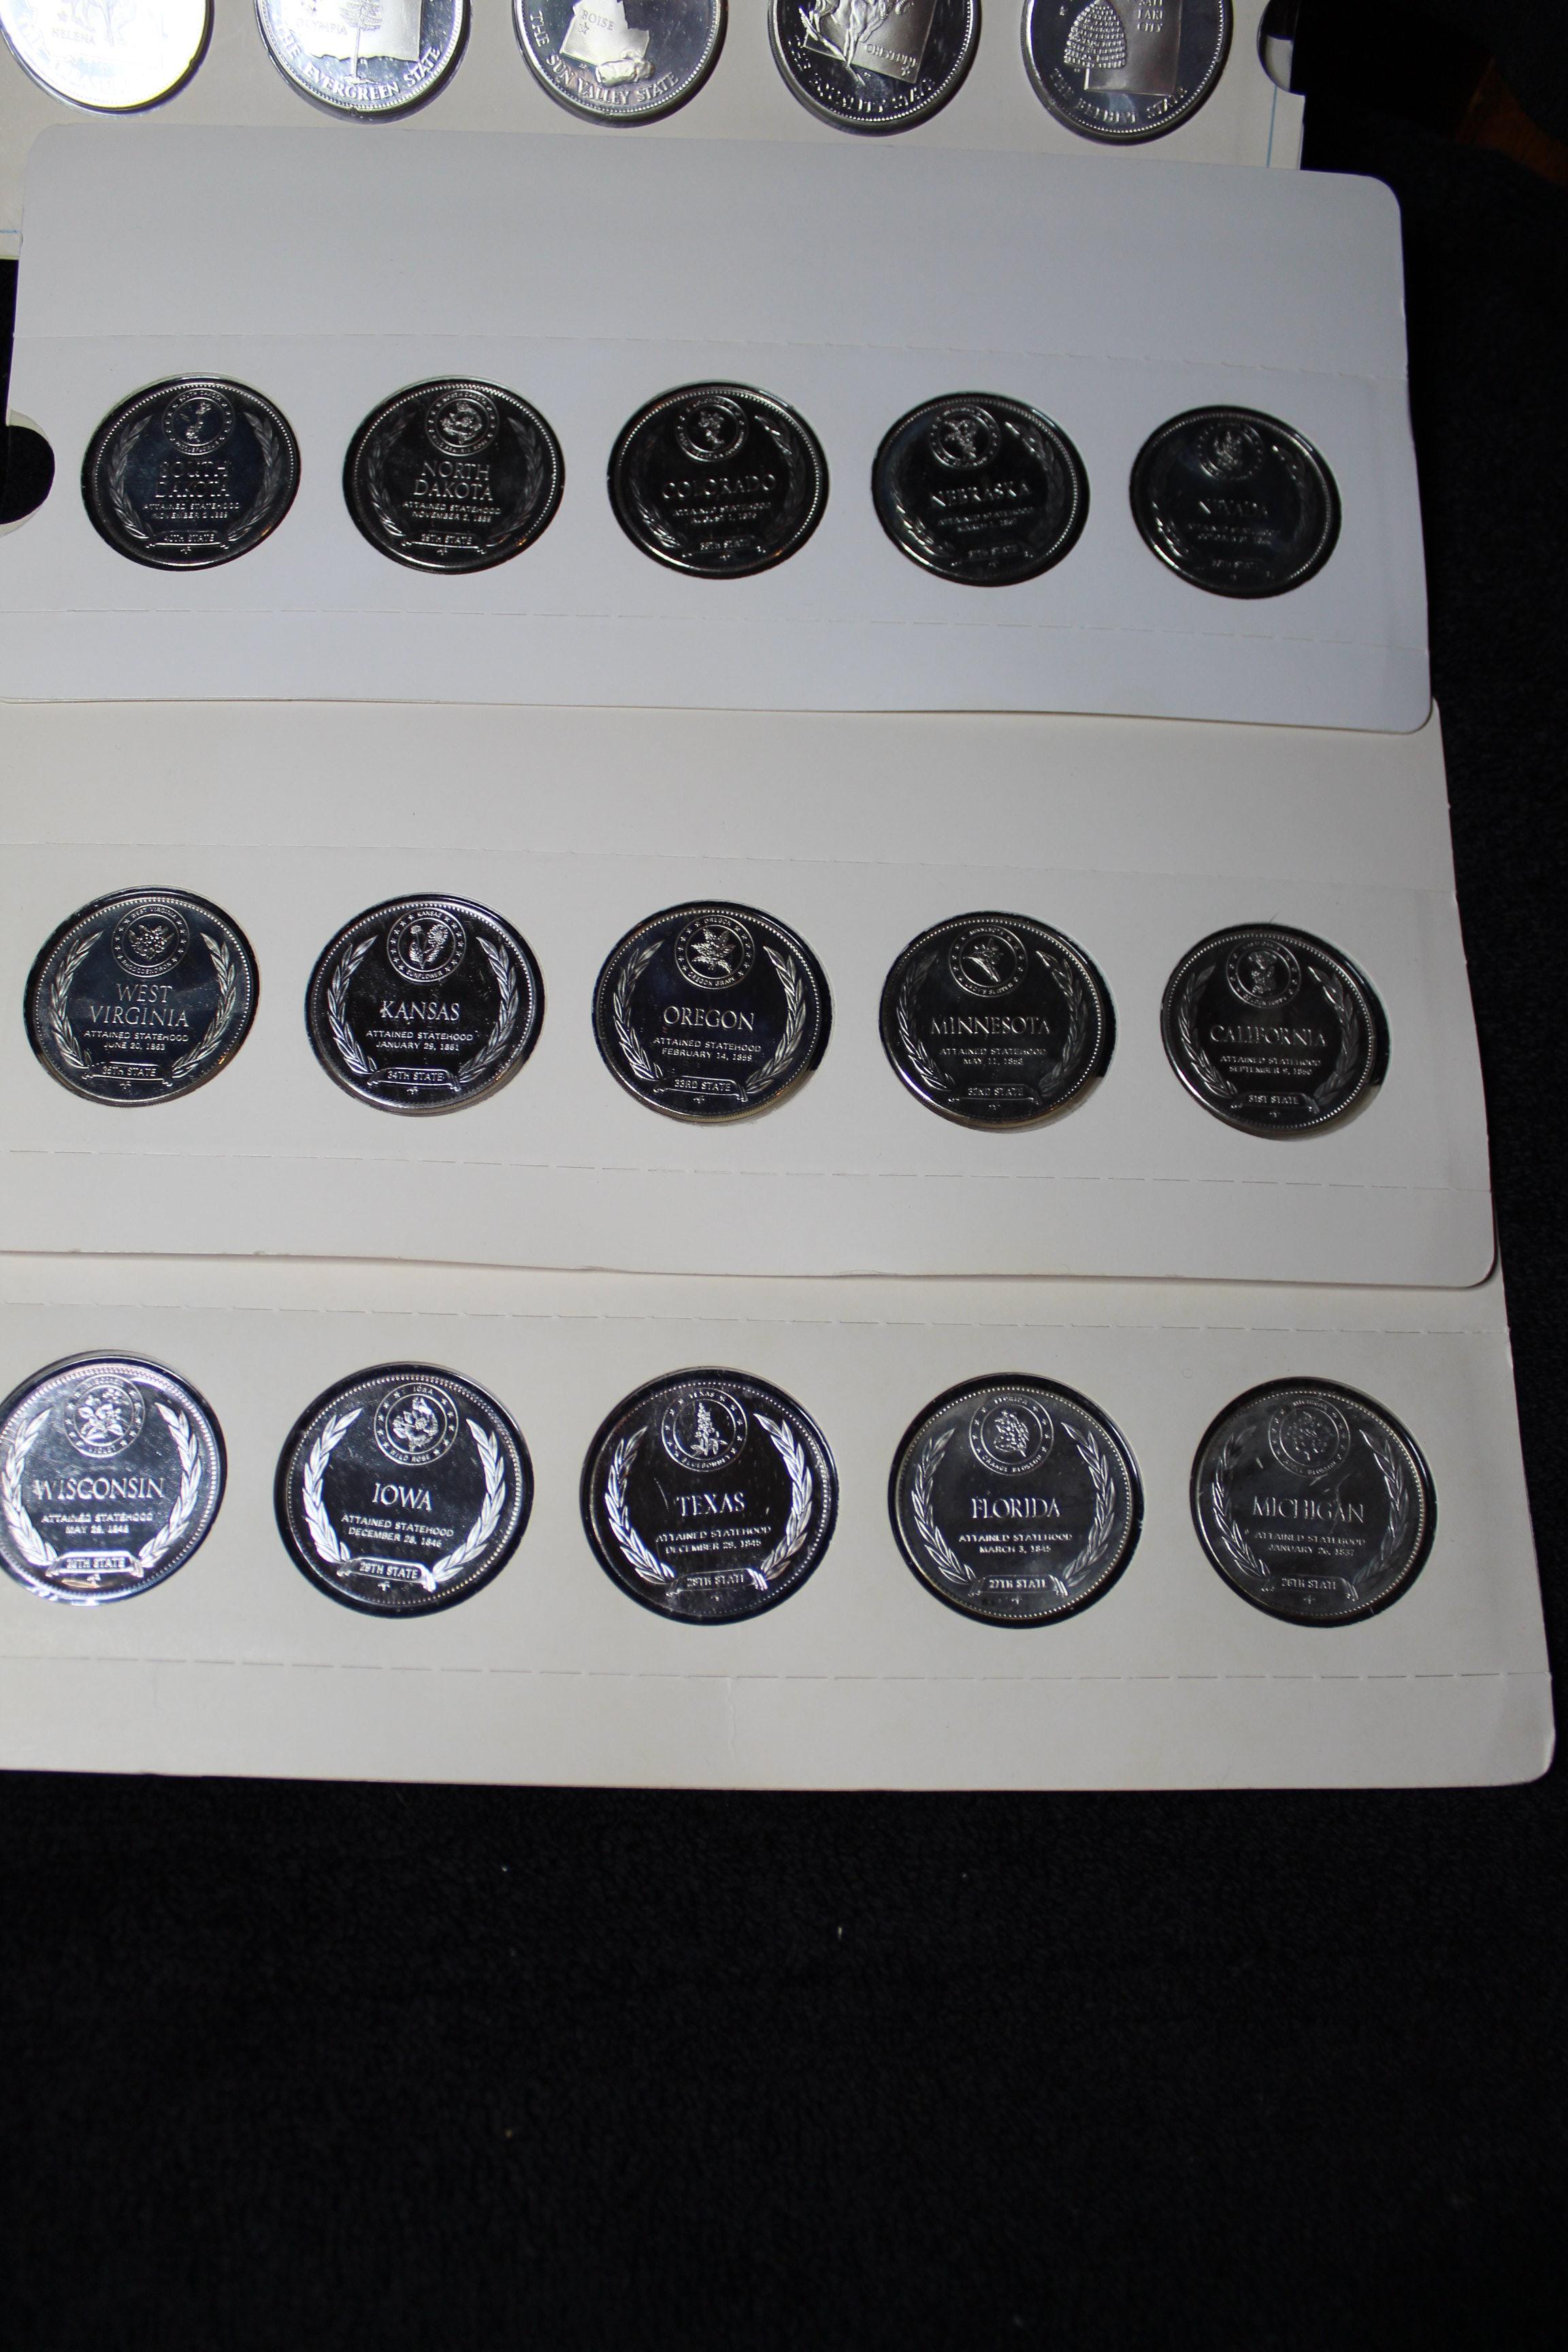 Complete Pristine Franklin Mint 'States of the Union Series' Sterling Silver 50 pc Set OGP